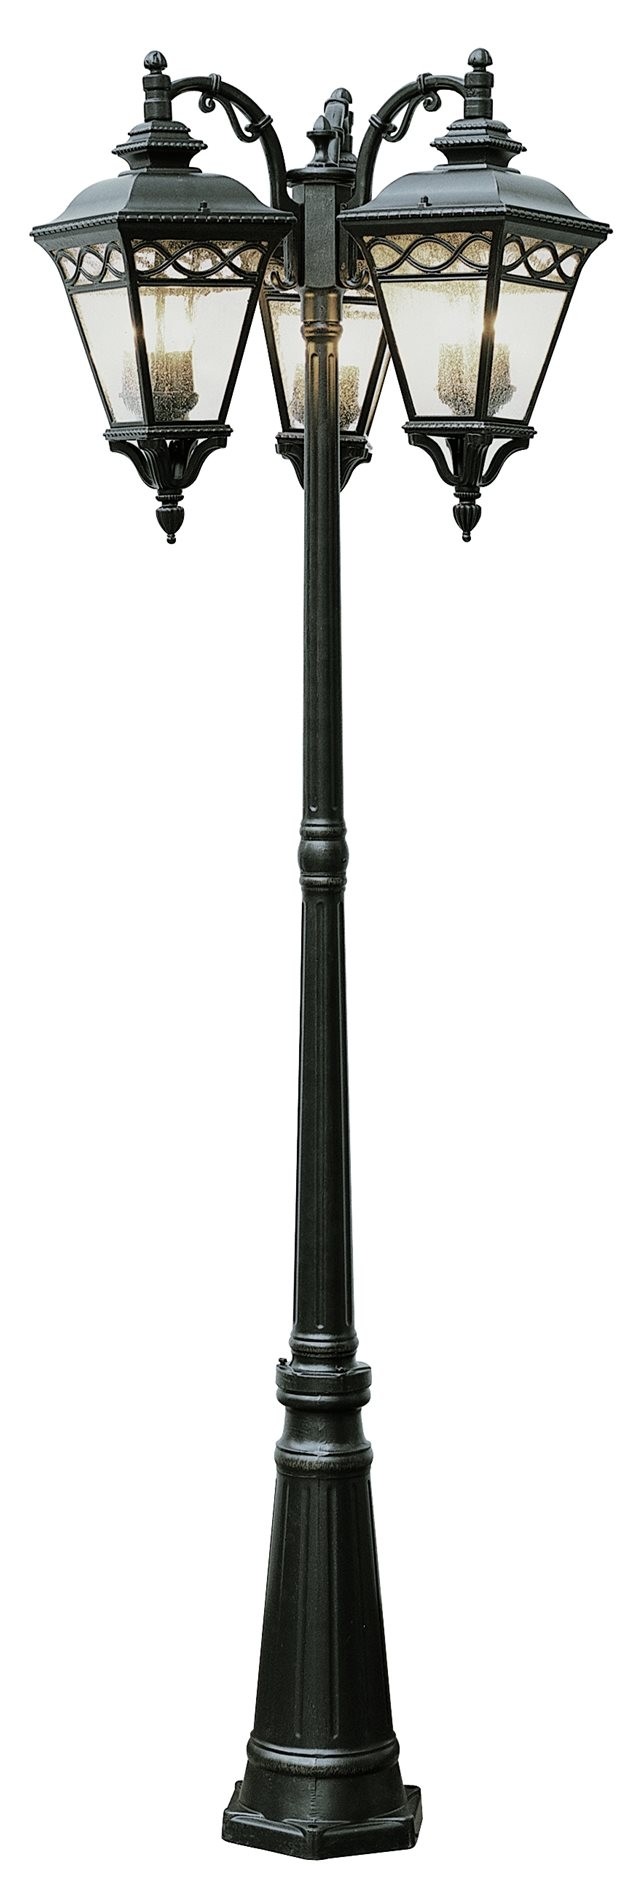 Trans globe lighting 50518 traditional outdoor lamp post